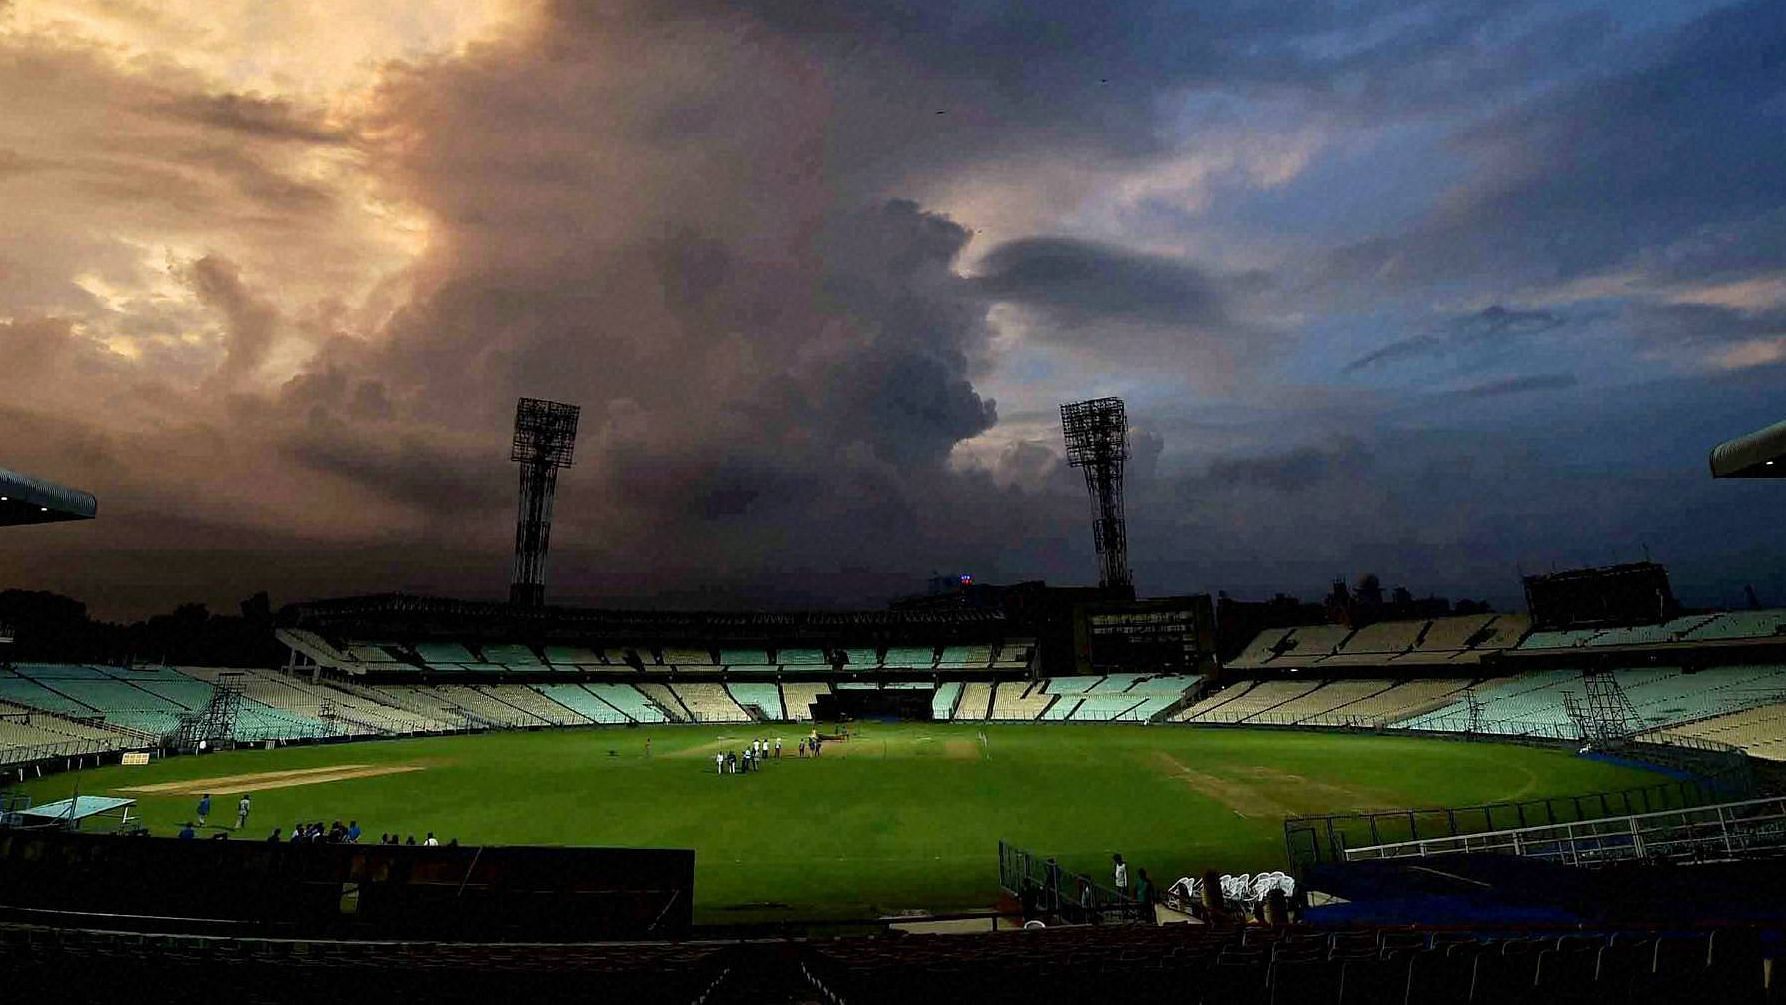 Eden Gardens is hosting the first-ever Day-Night Test match being played in India.